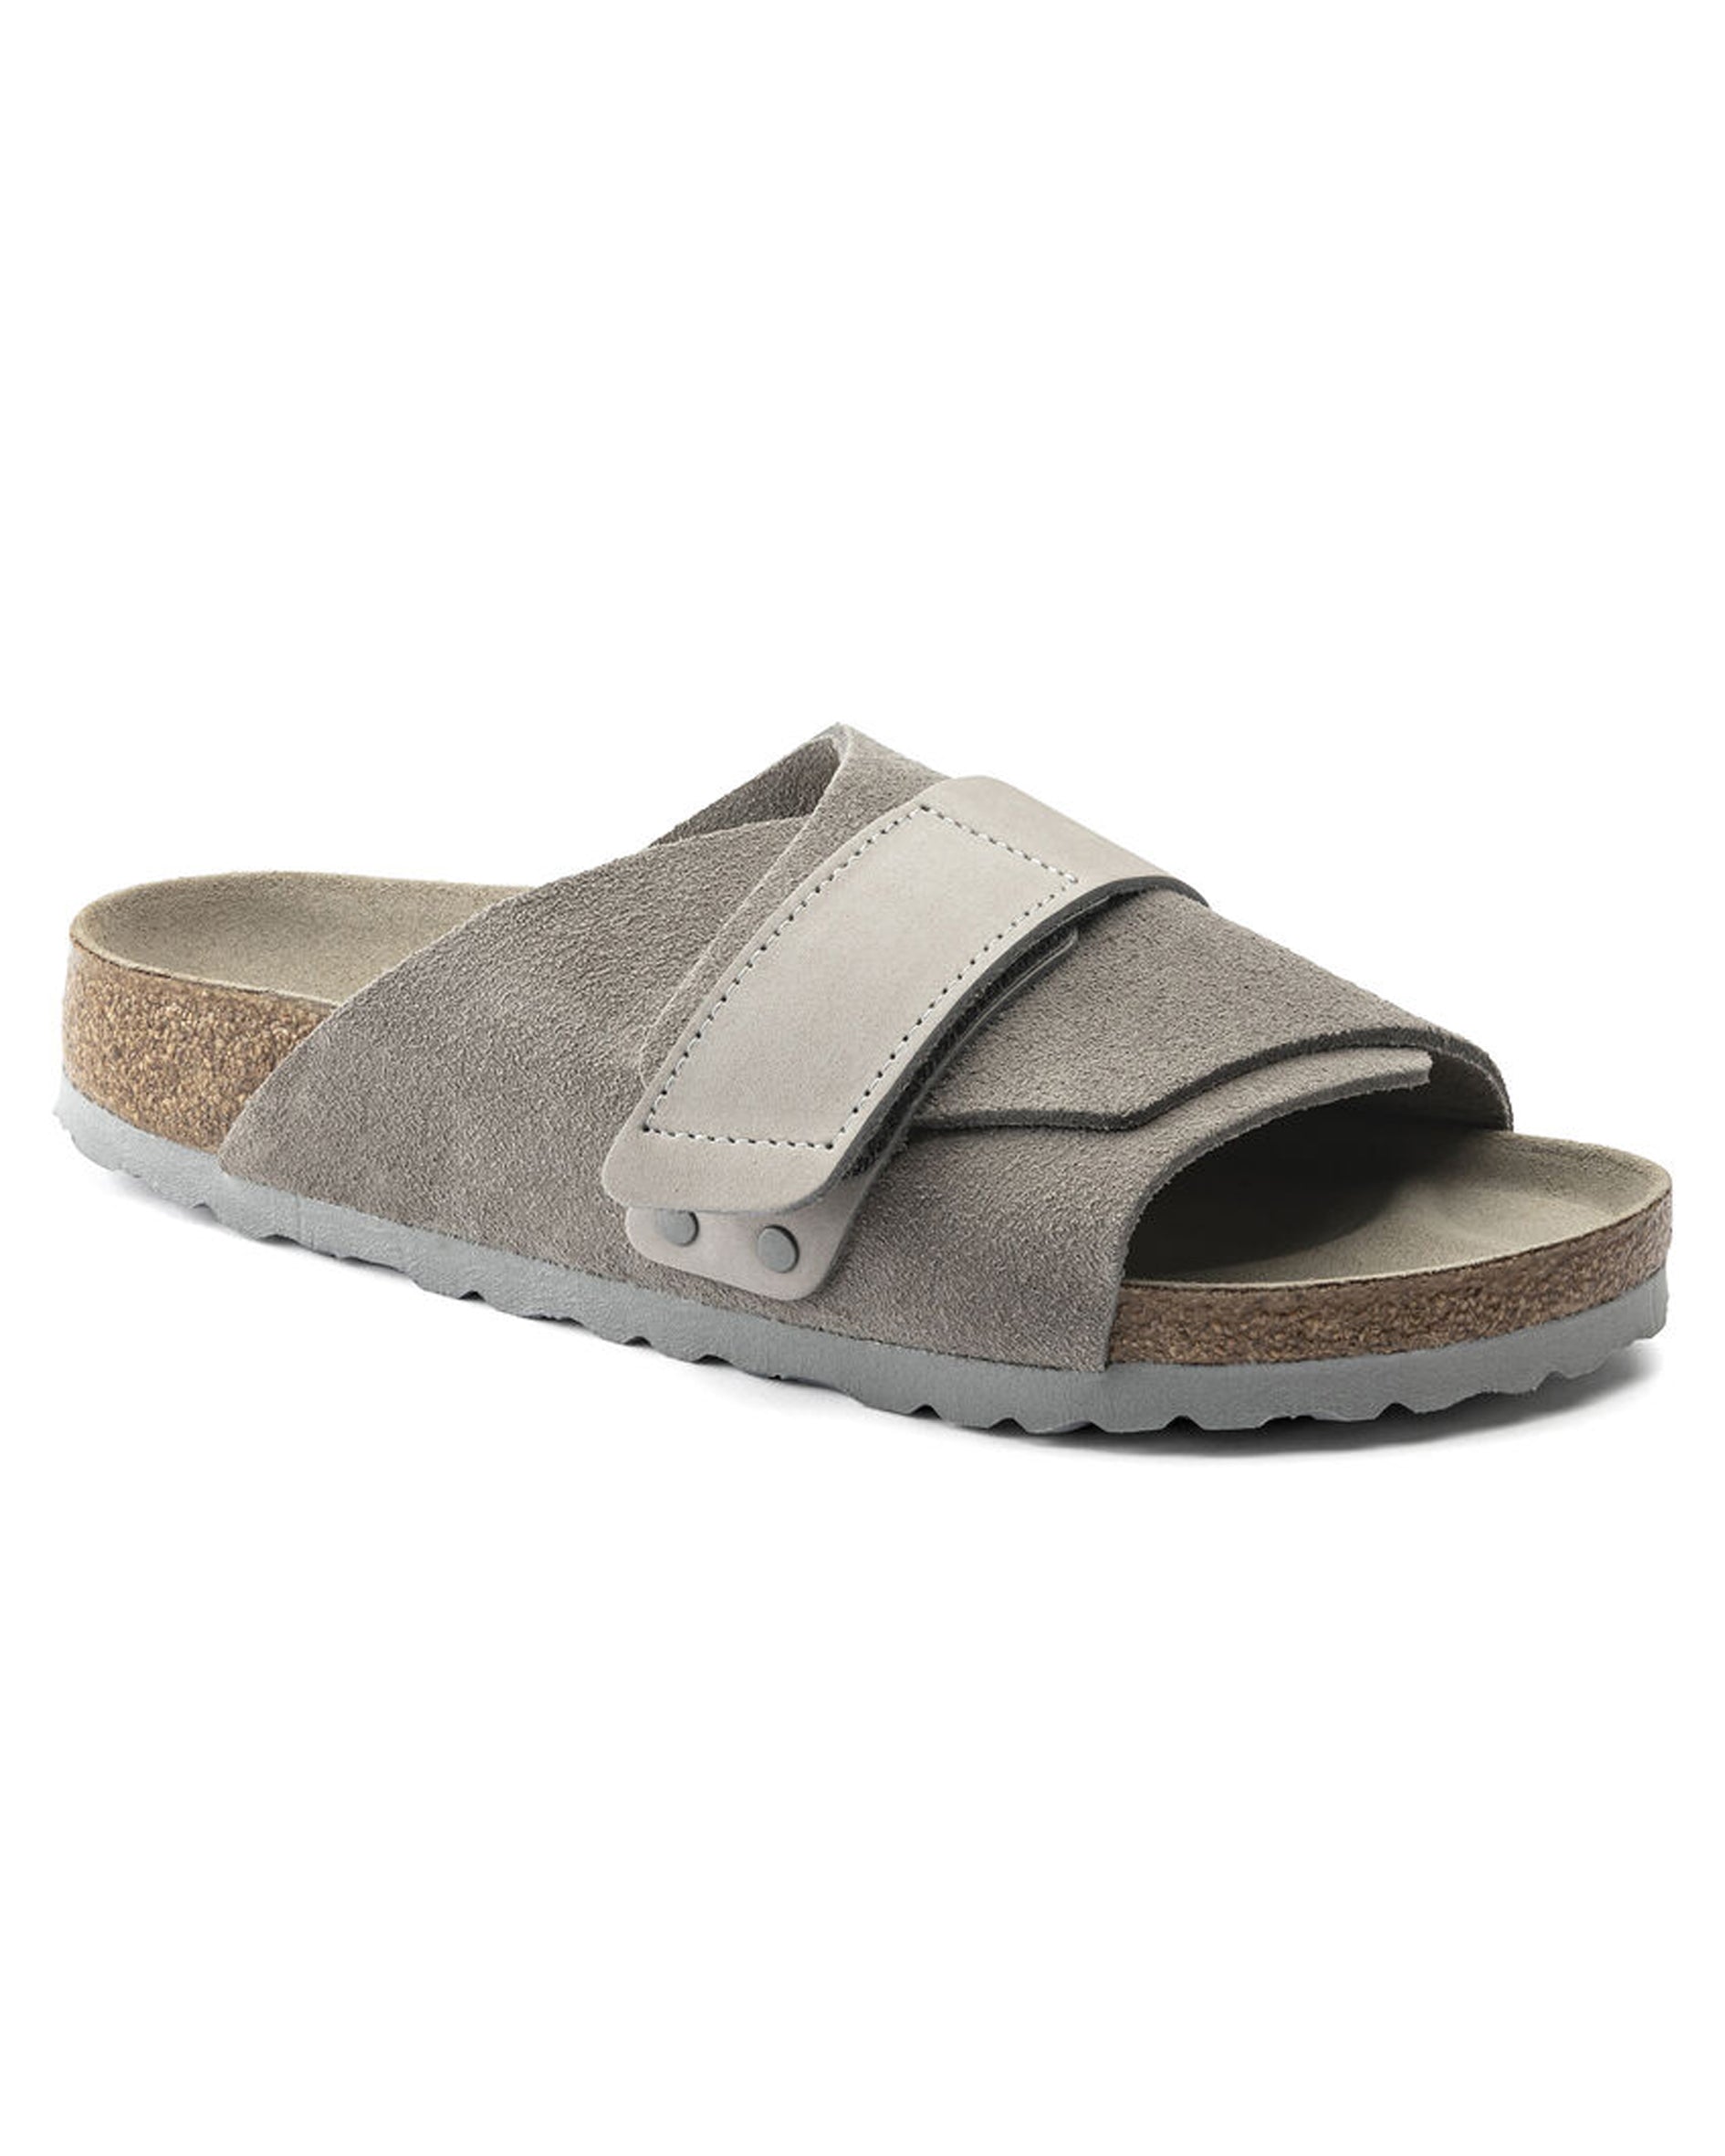 Kyoto Stone Coin Soft Suede & Nubuck Leather Sandals